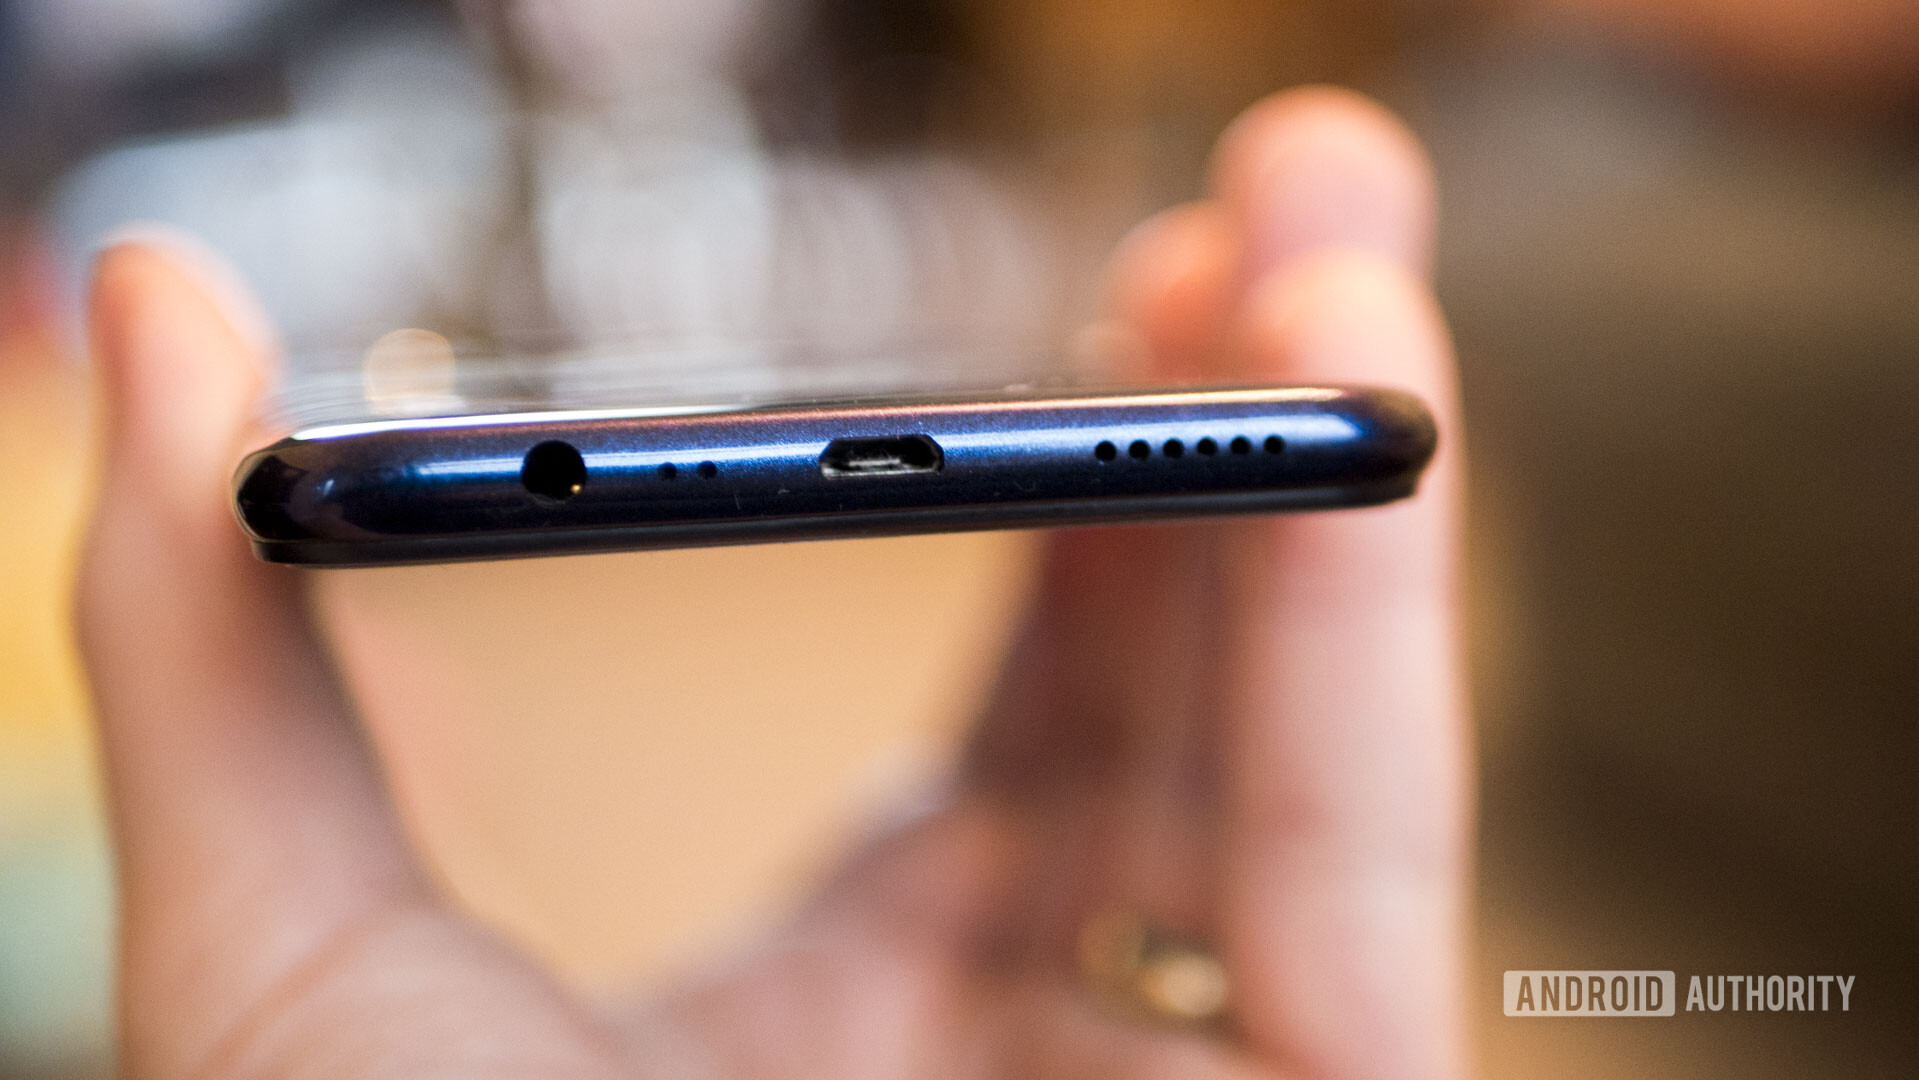 Bottom side of the Realme 3 showing the microUSB, headphone jack and speaker grill.